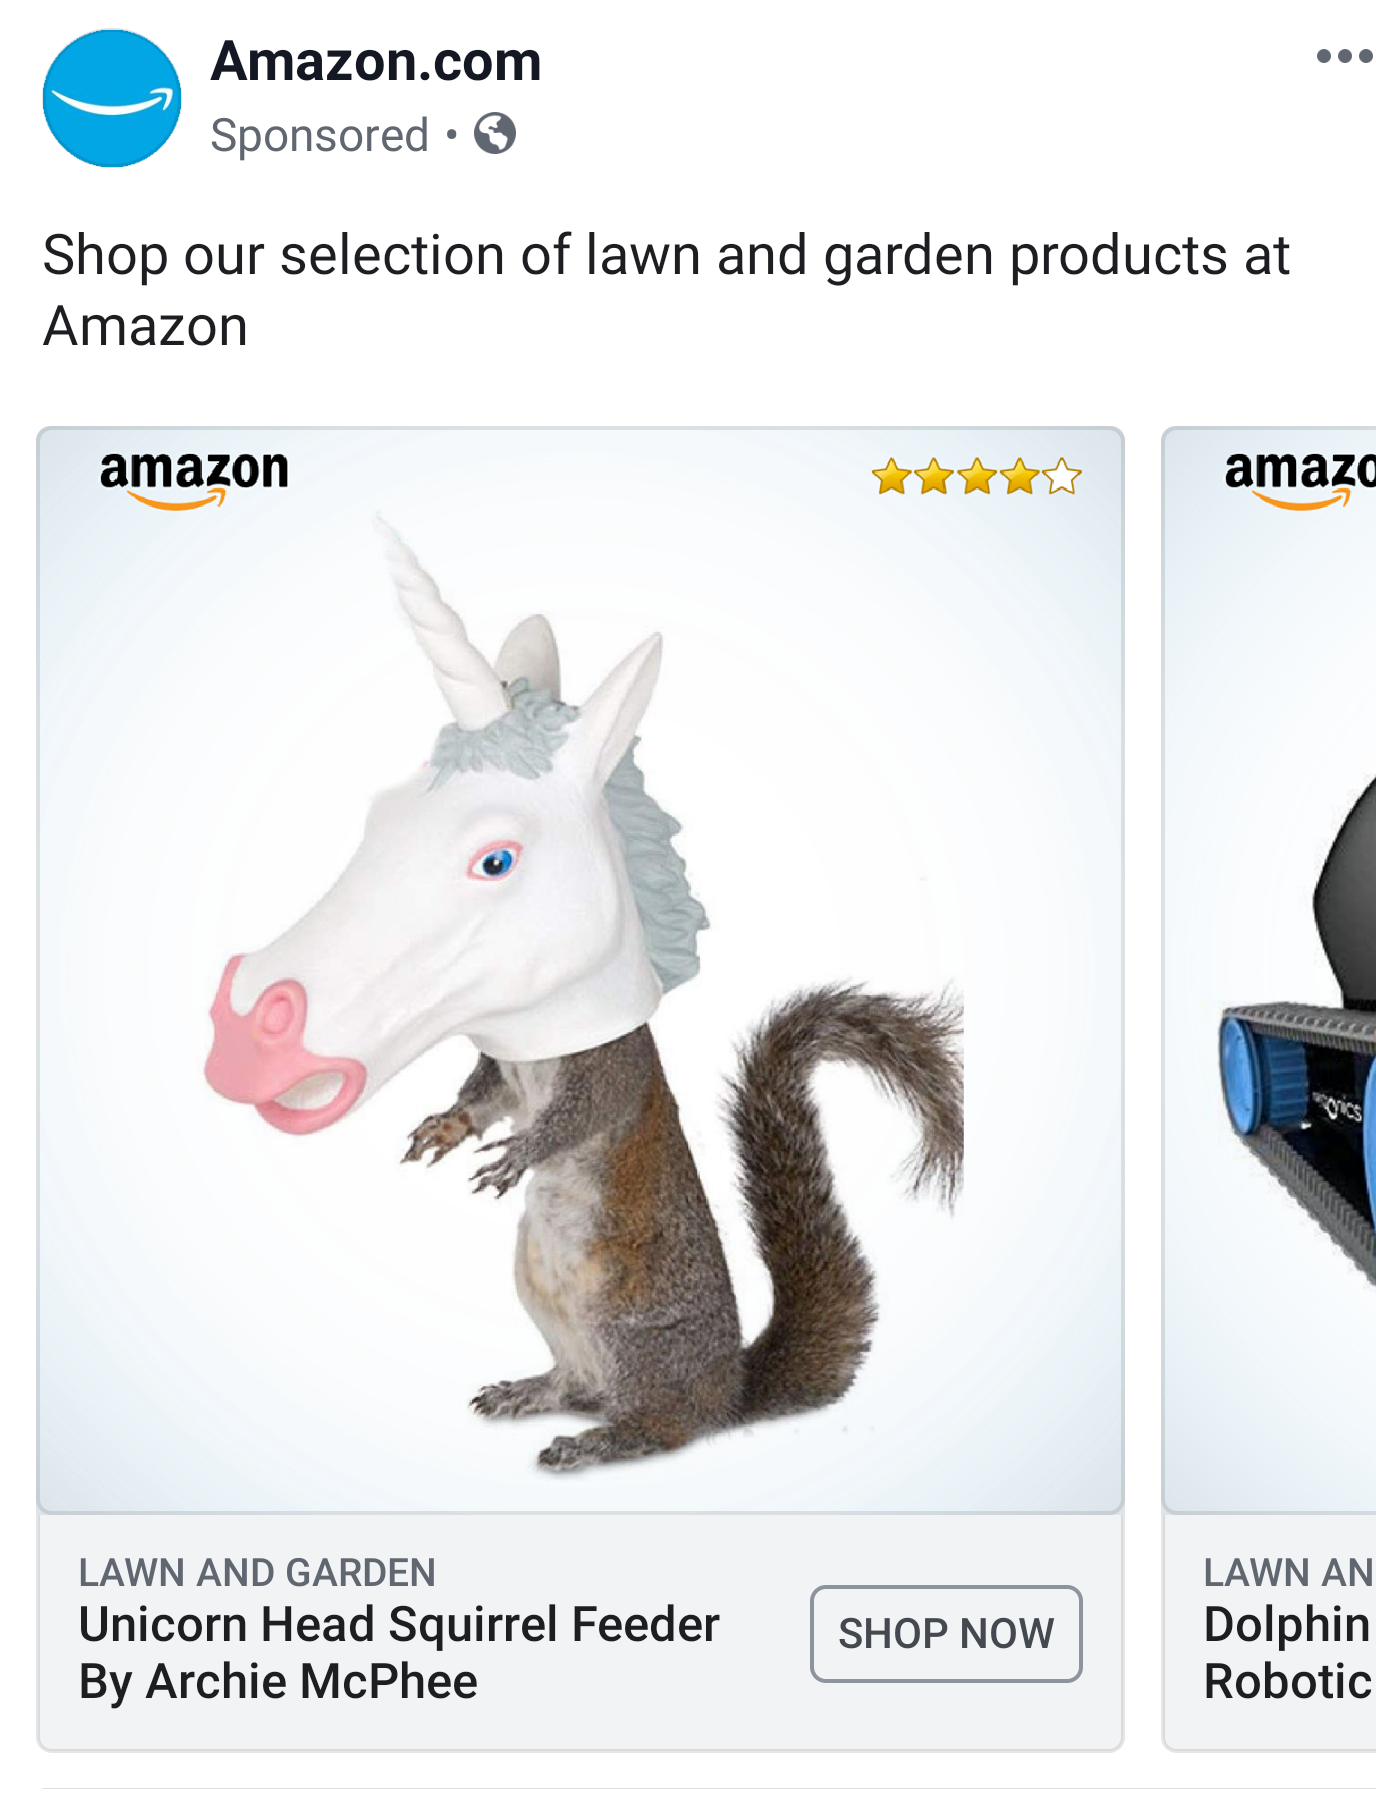 bird unicorn - Amazon.com Sponsored. Shop our selection of lawn and garden products at Amazon amazon We amazd s Lawn And Garden Unicorn Head Squirrel Feeder By Archie McPhee Shop Now Lawn An Dolphin Robotic